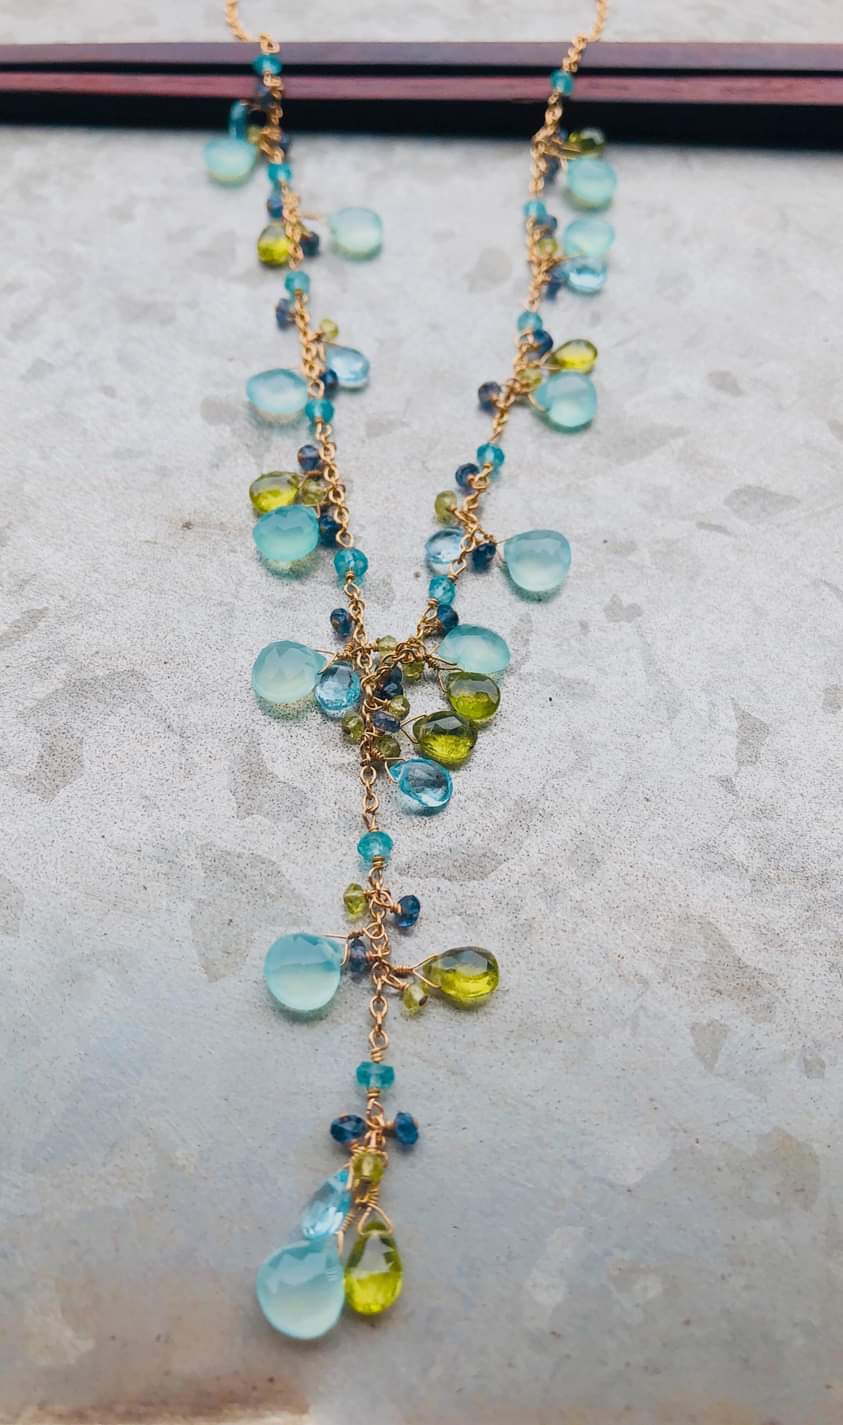 pom jewelry necklace, chaledony, blue topaz, peridot and iolite in gold fill